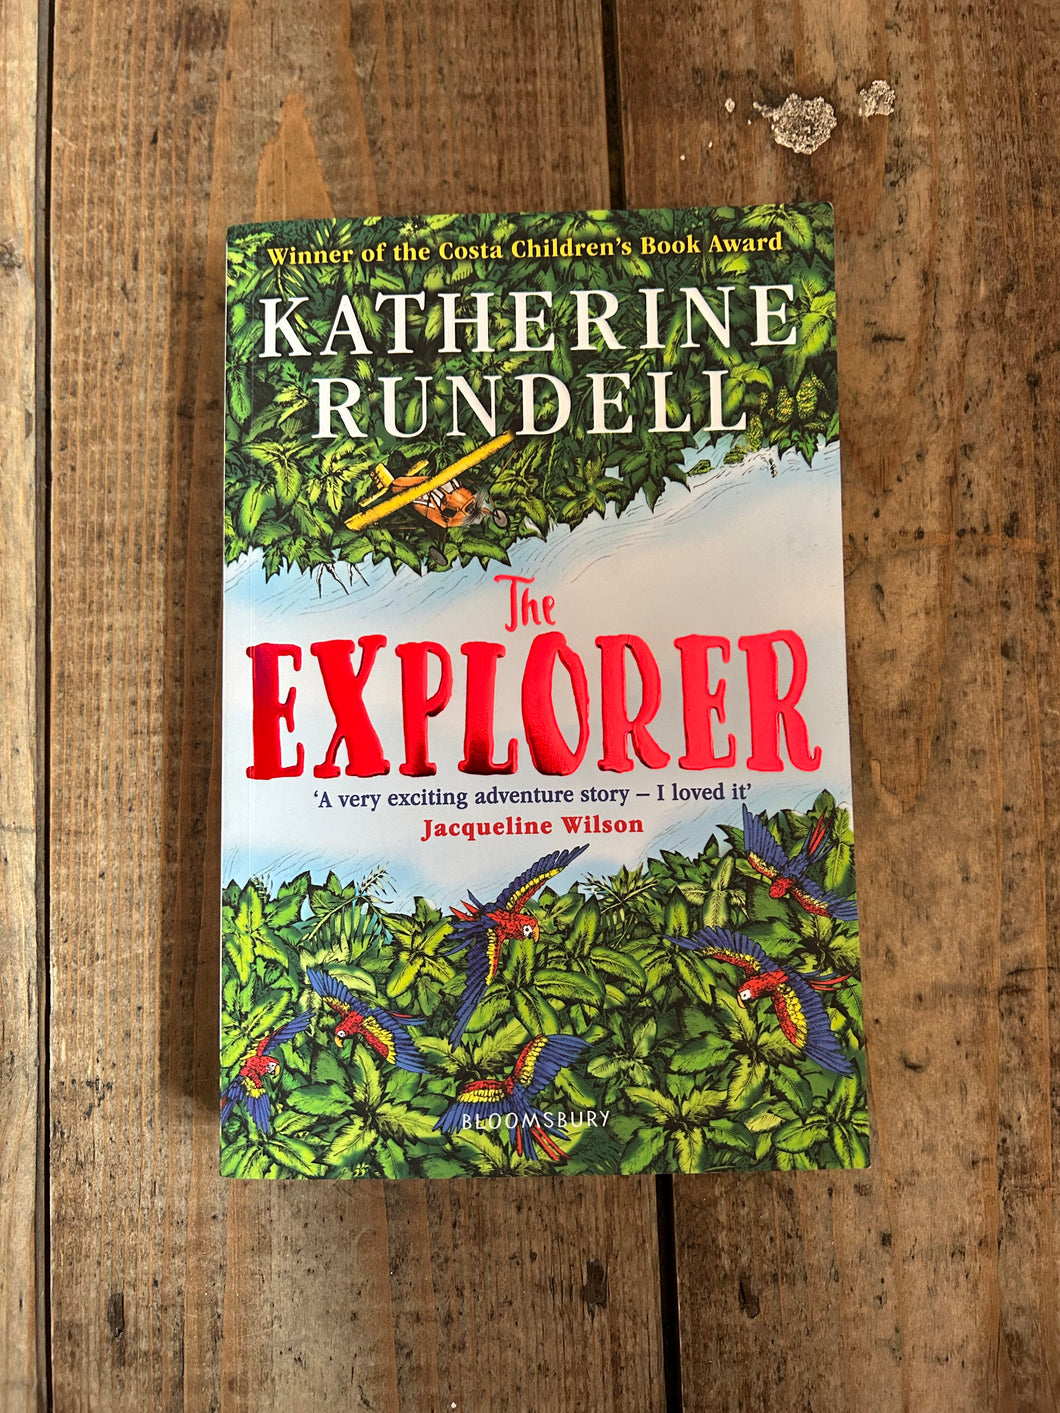 The explorer by Katherine Rundell